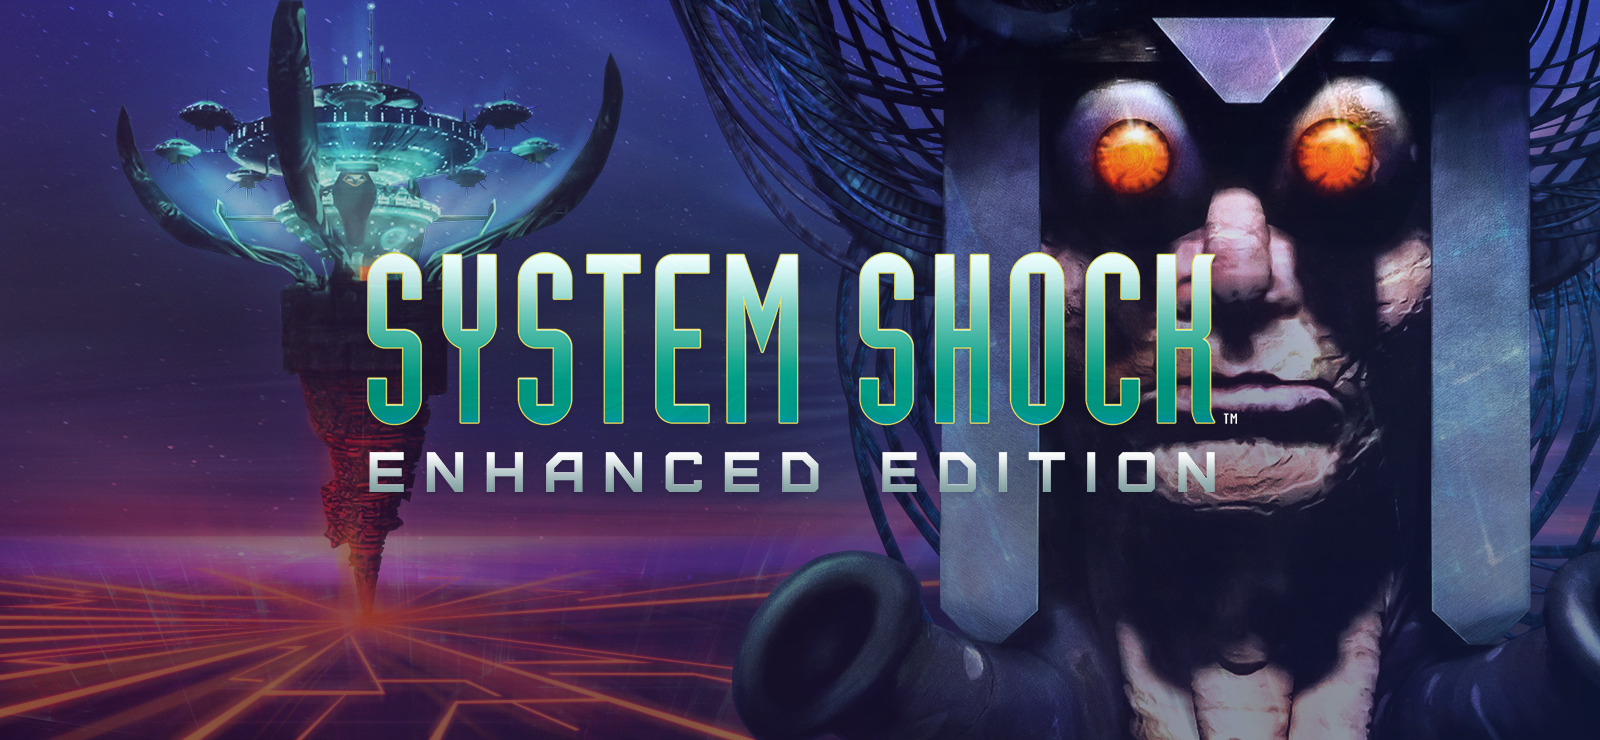 system shock enhanced edition music sounds bad